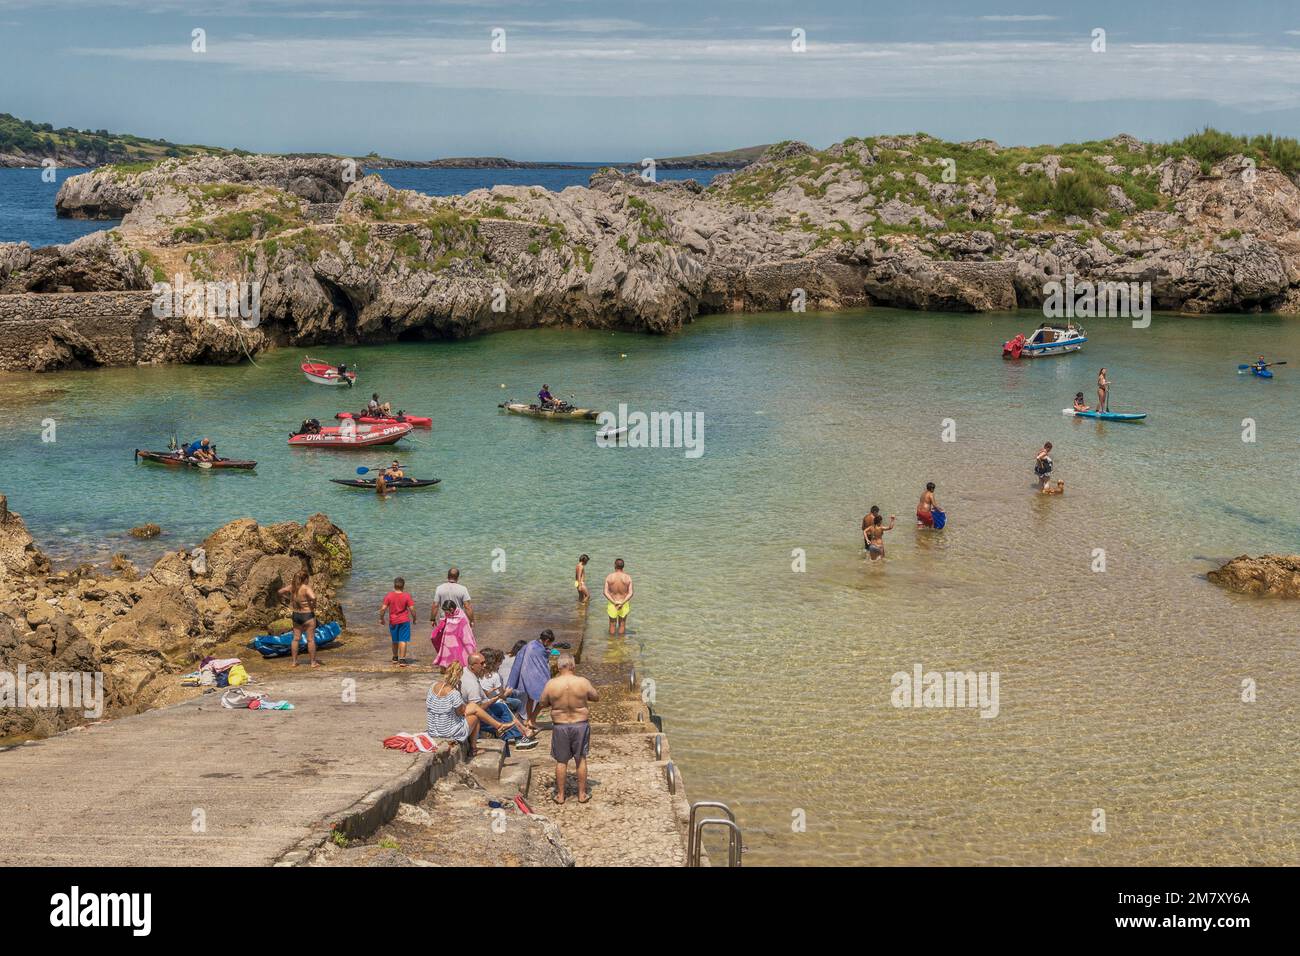 men, women, youth, boys and girls bathing, fishing in a canoe, paddle surfing and sitting sunbathing on a beach closed by rocks and stones in Spain. Stock Photo